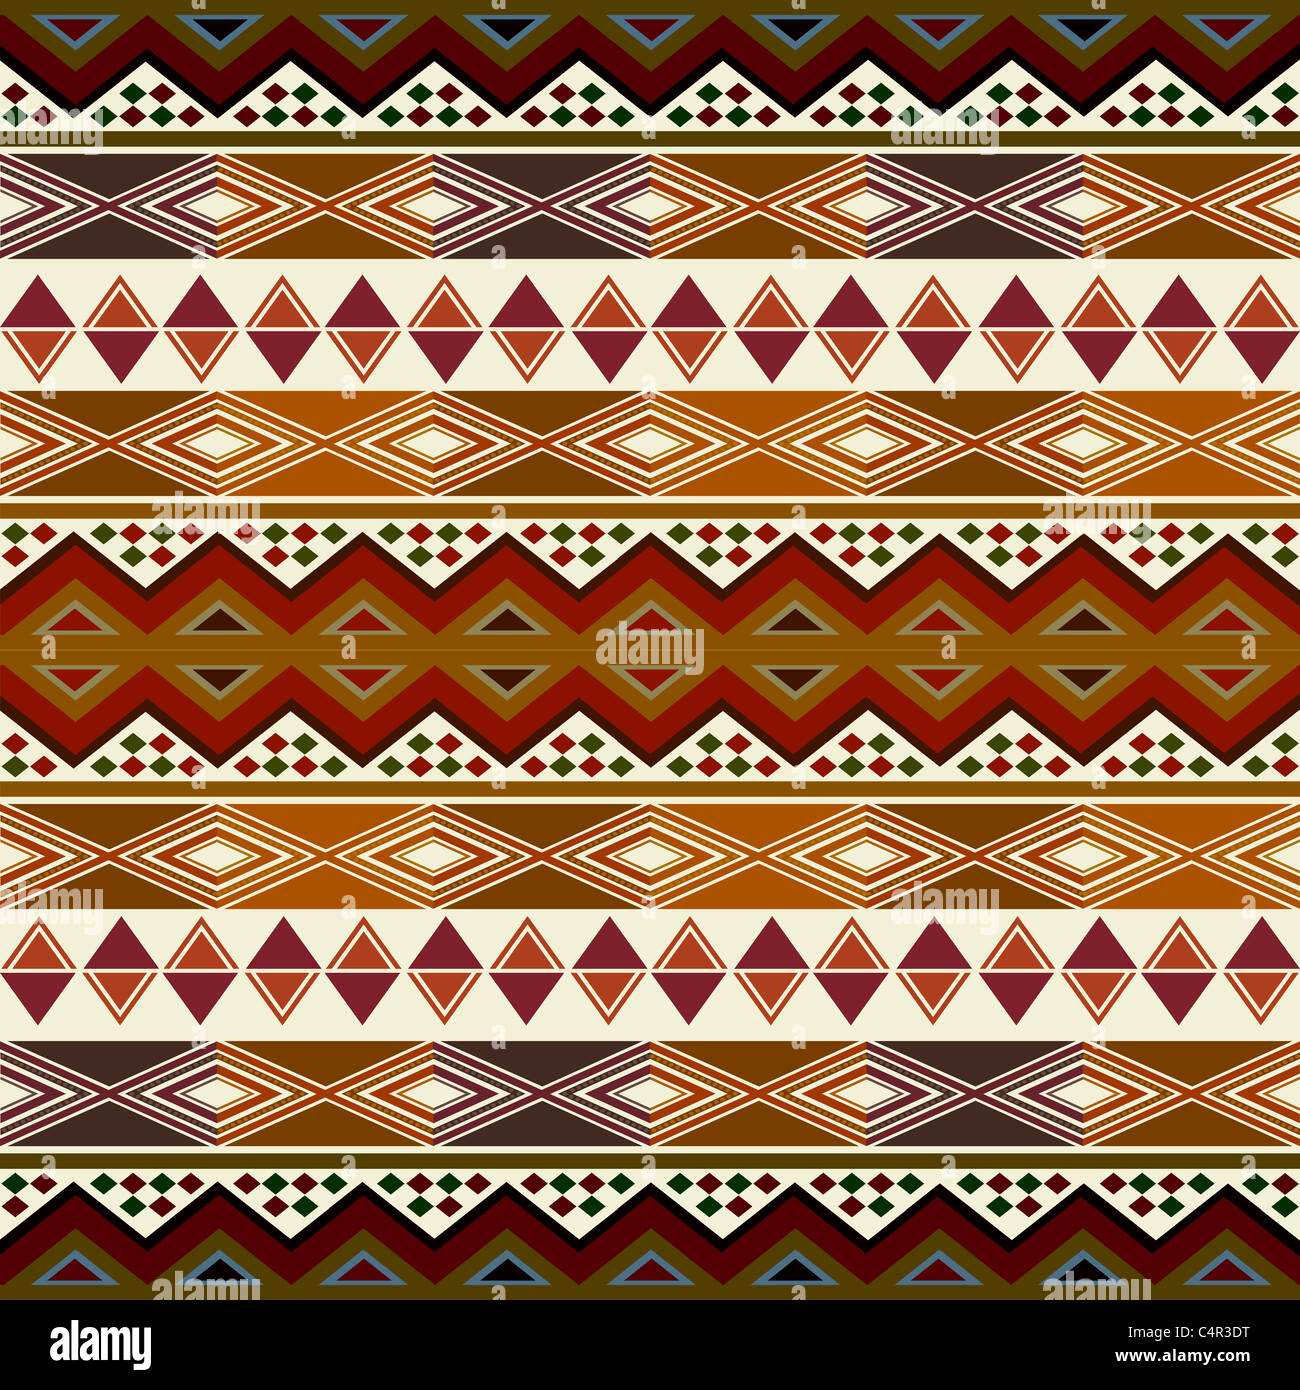 Multicolored african pattern with geometric shapes/symbols Stock Photo